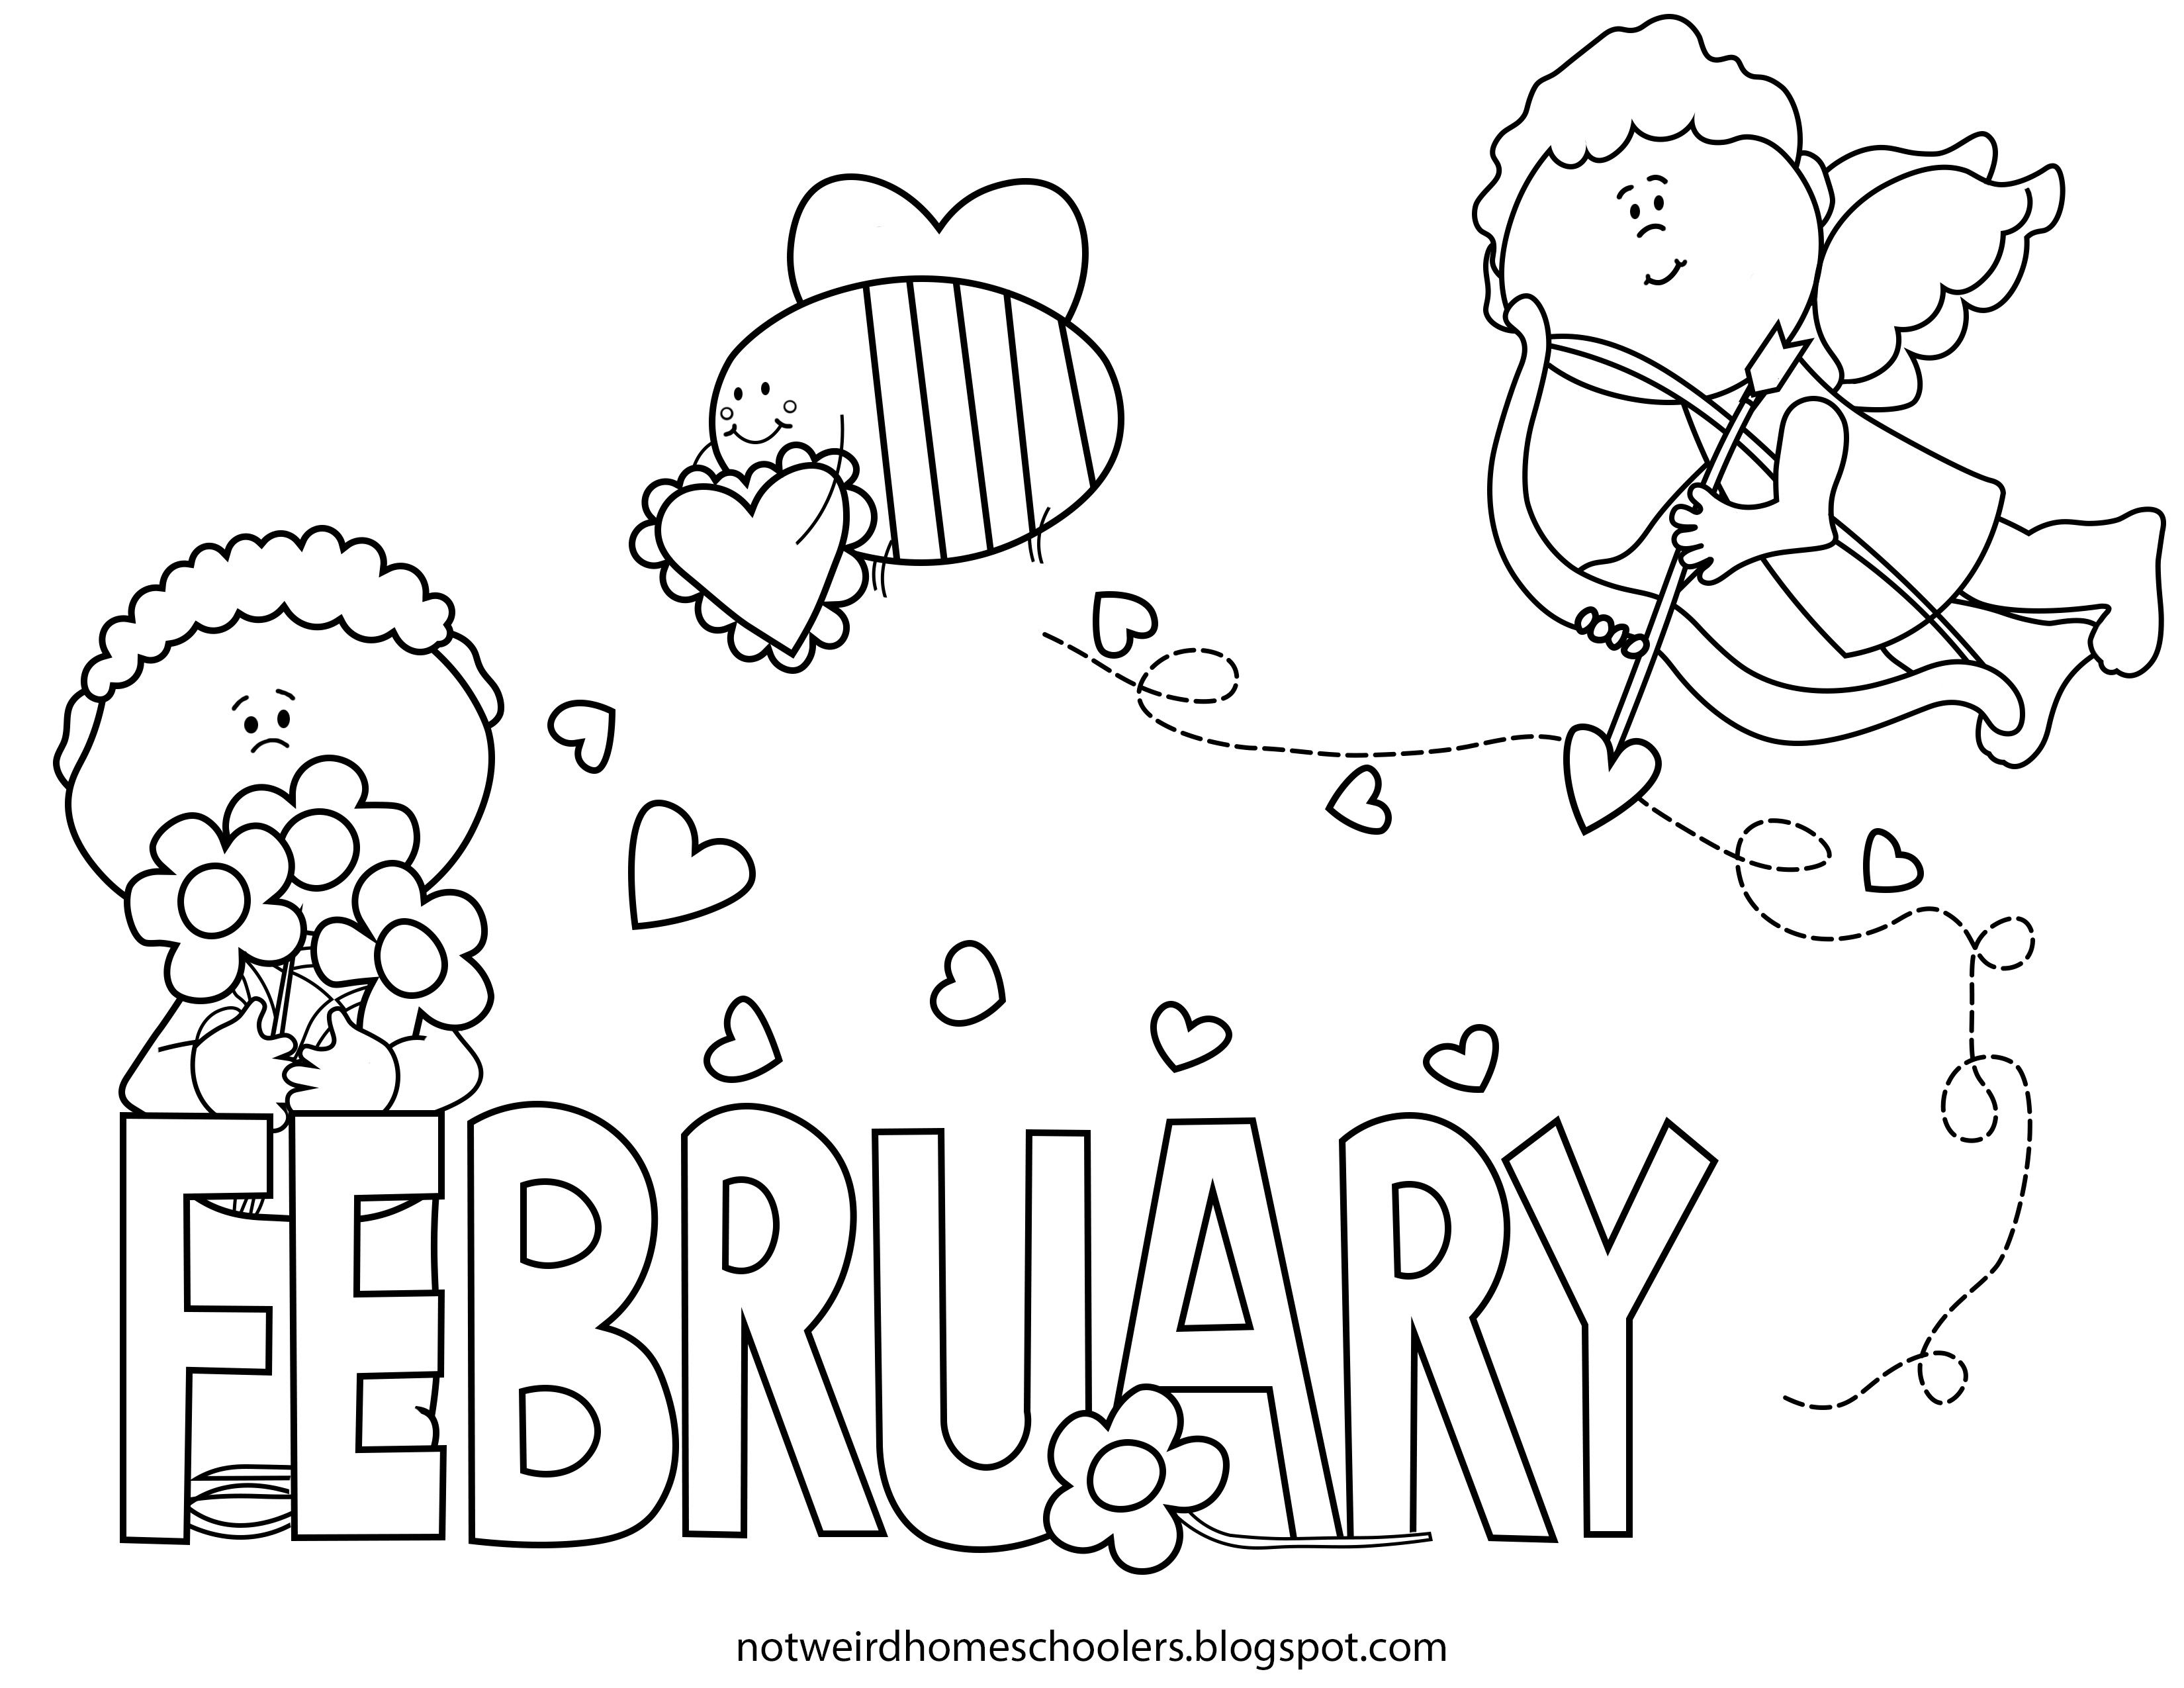 February valentines day coloring page valentines day coloring page valentine coloring pages kindergarten coloring pages